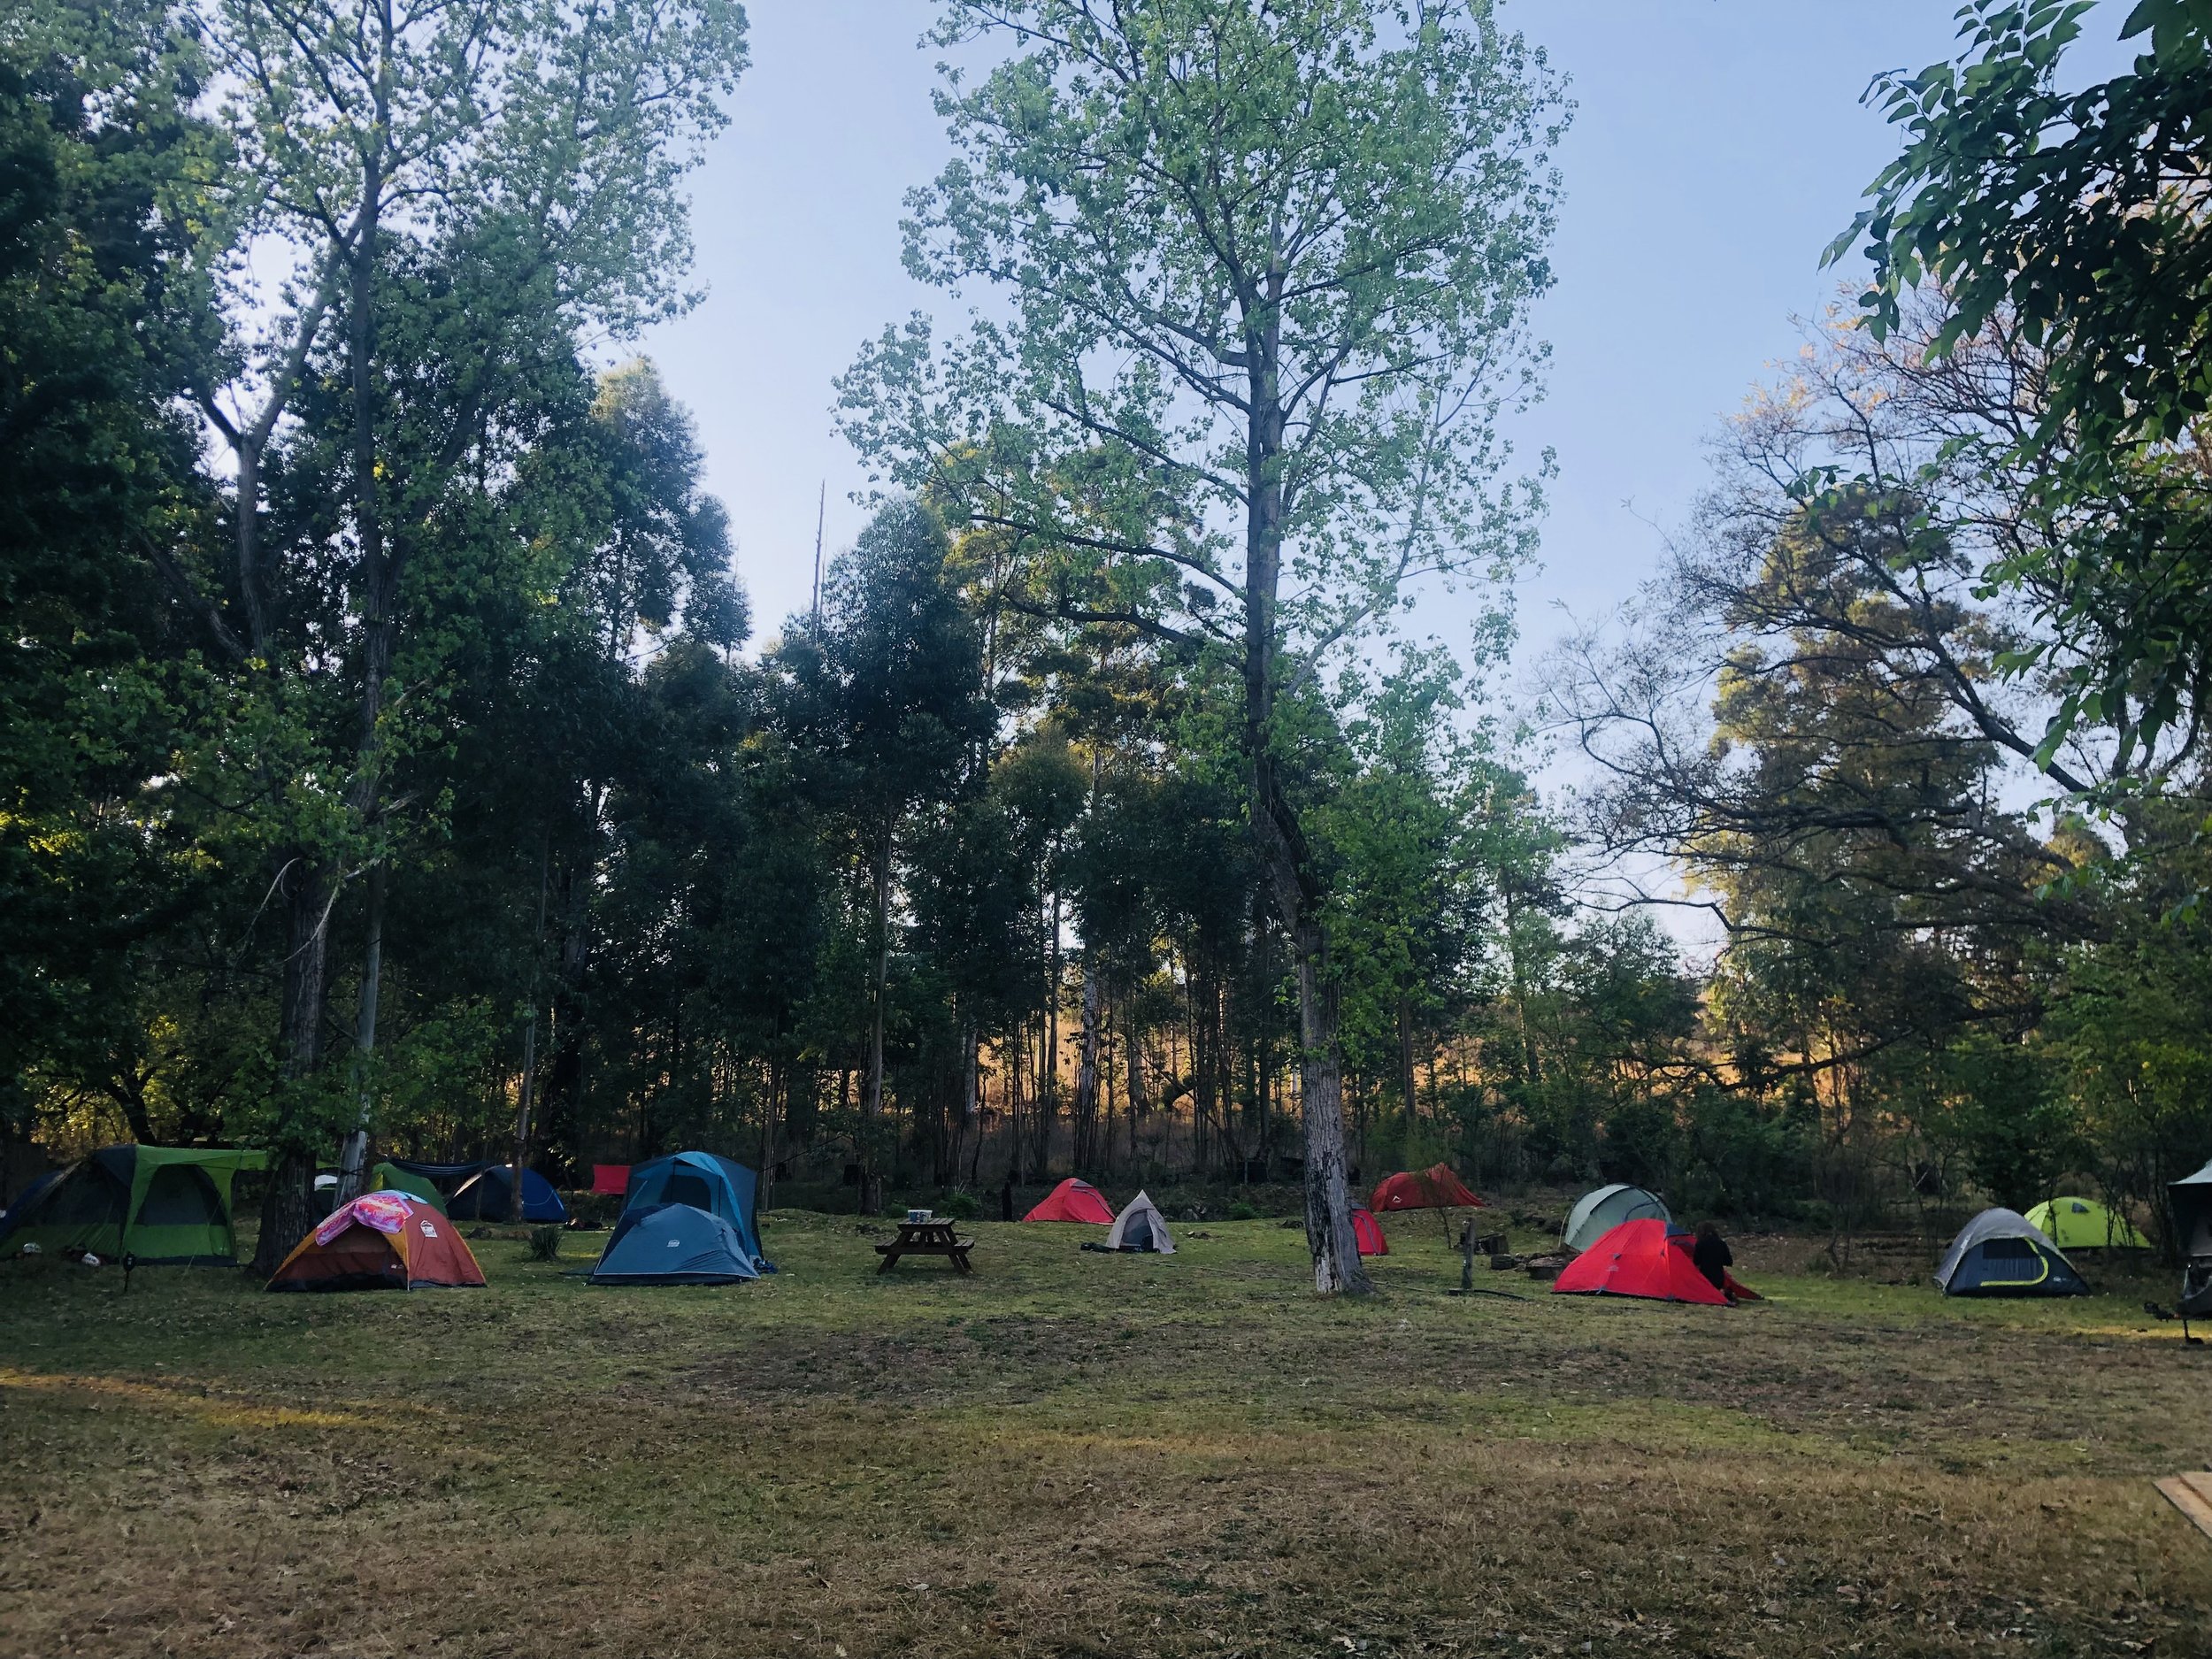 Campsite - many colorful tents.jpg